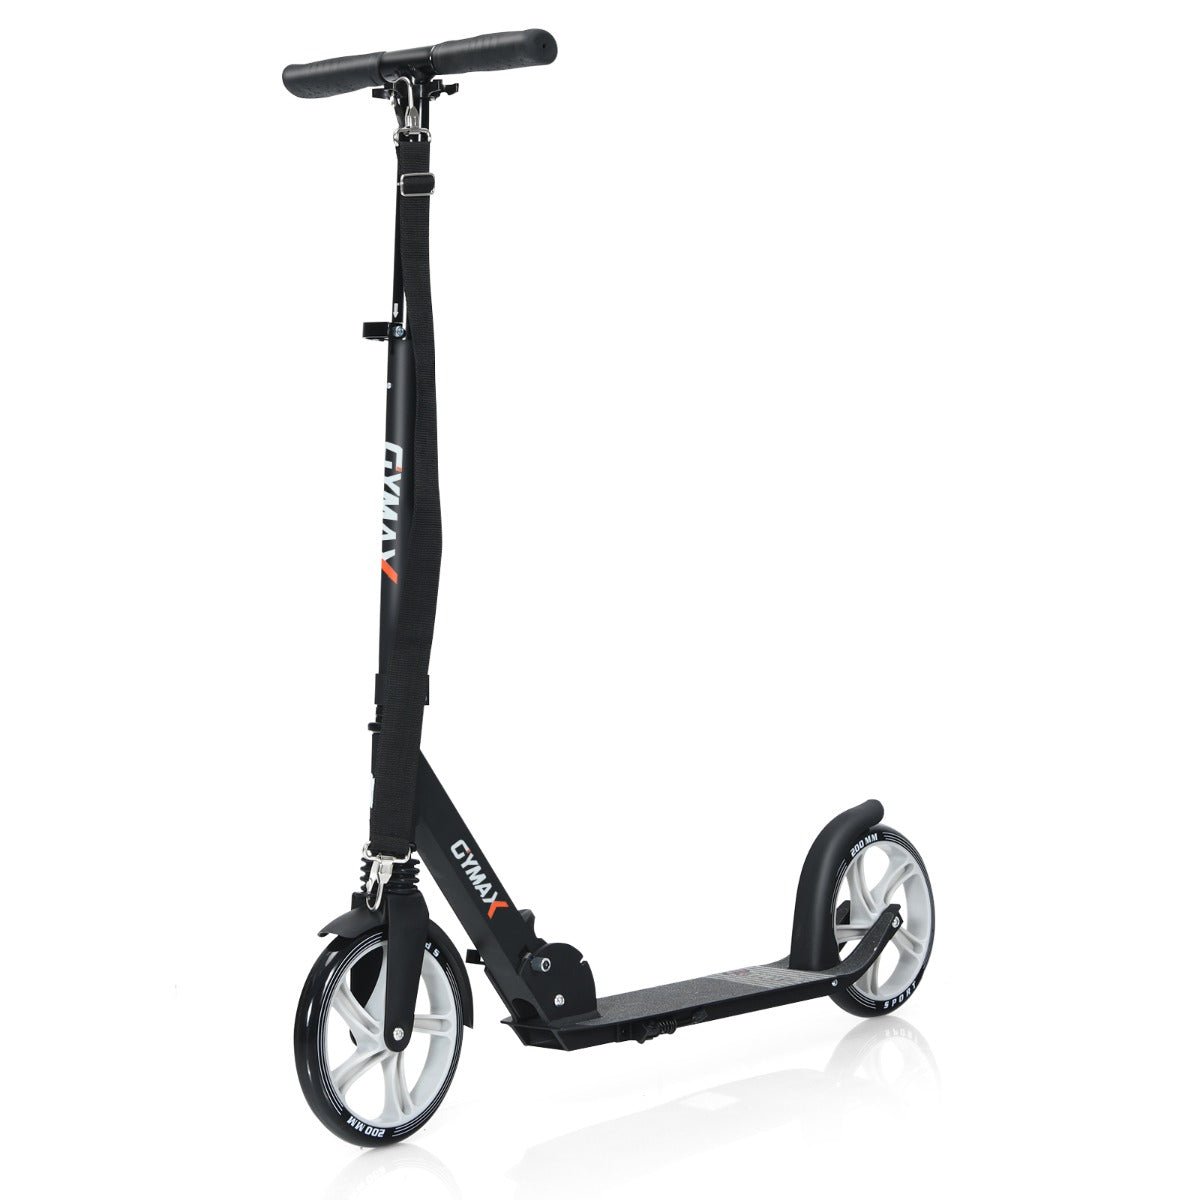 Kid's Folding Scooter: Black with Adjustable Height & Anti-Shock Suspension